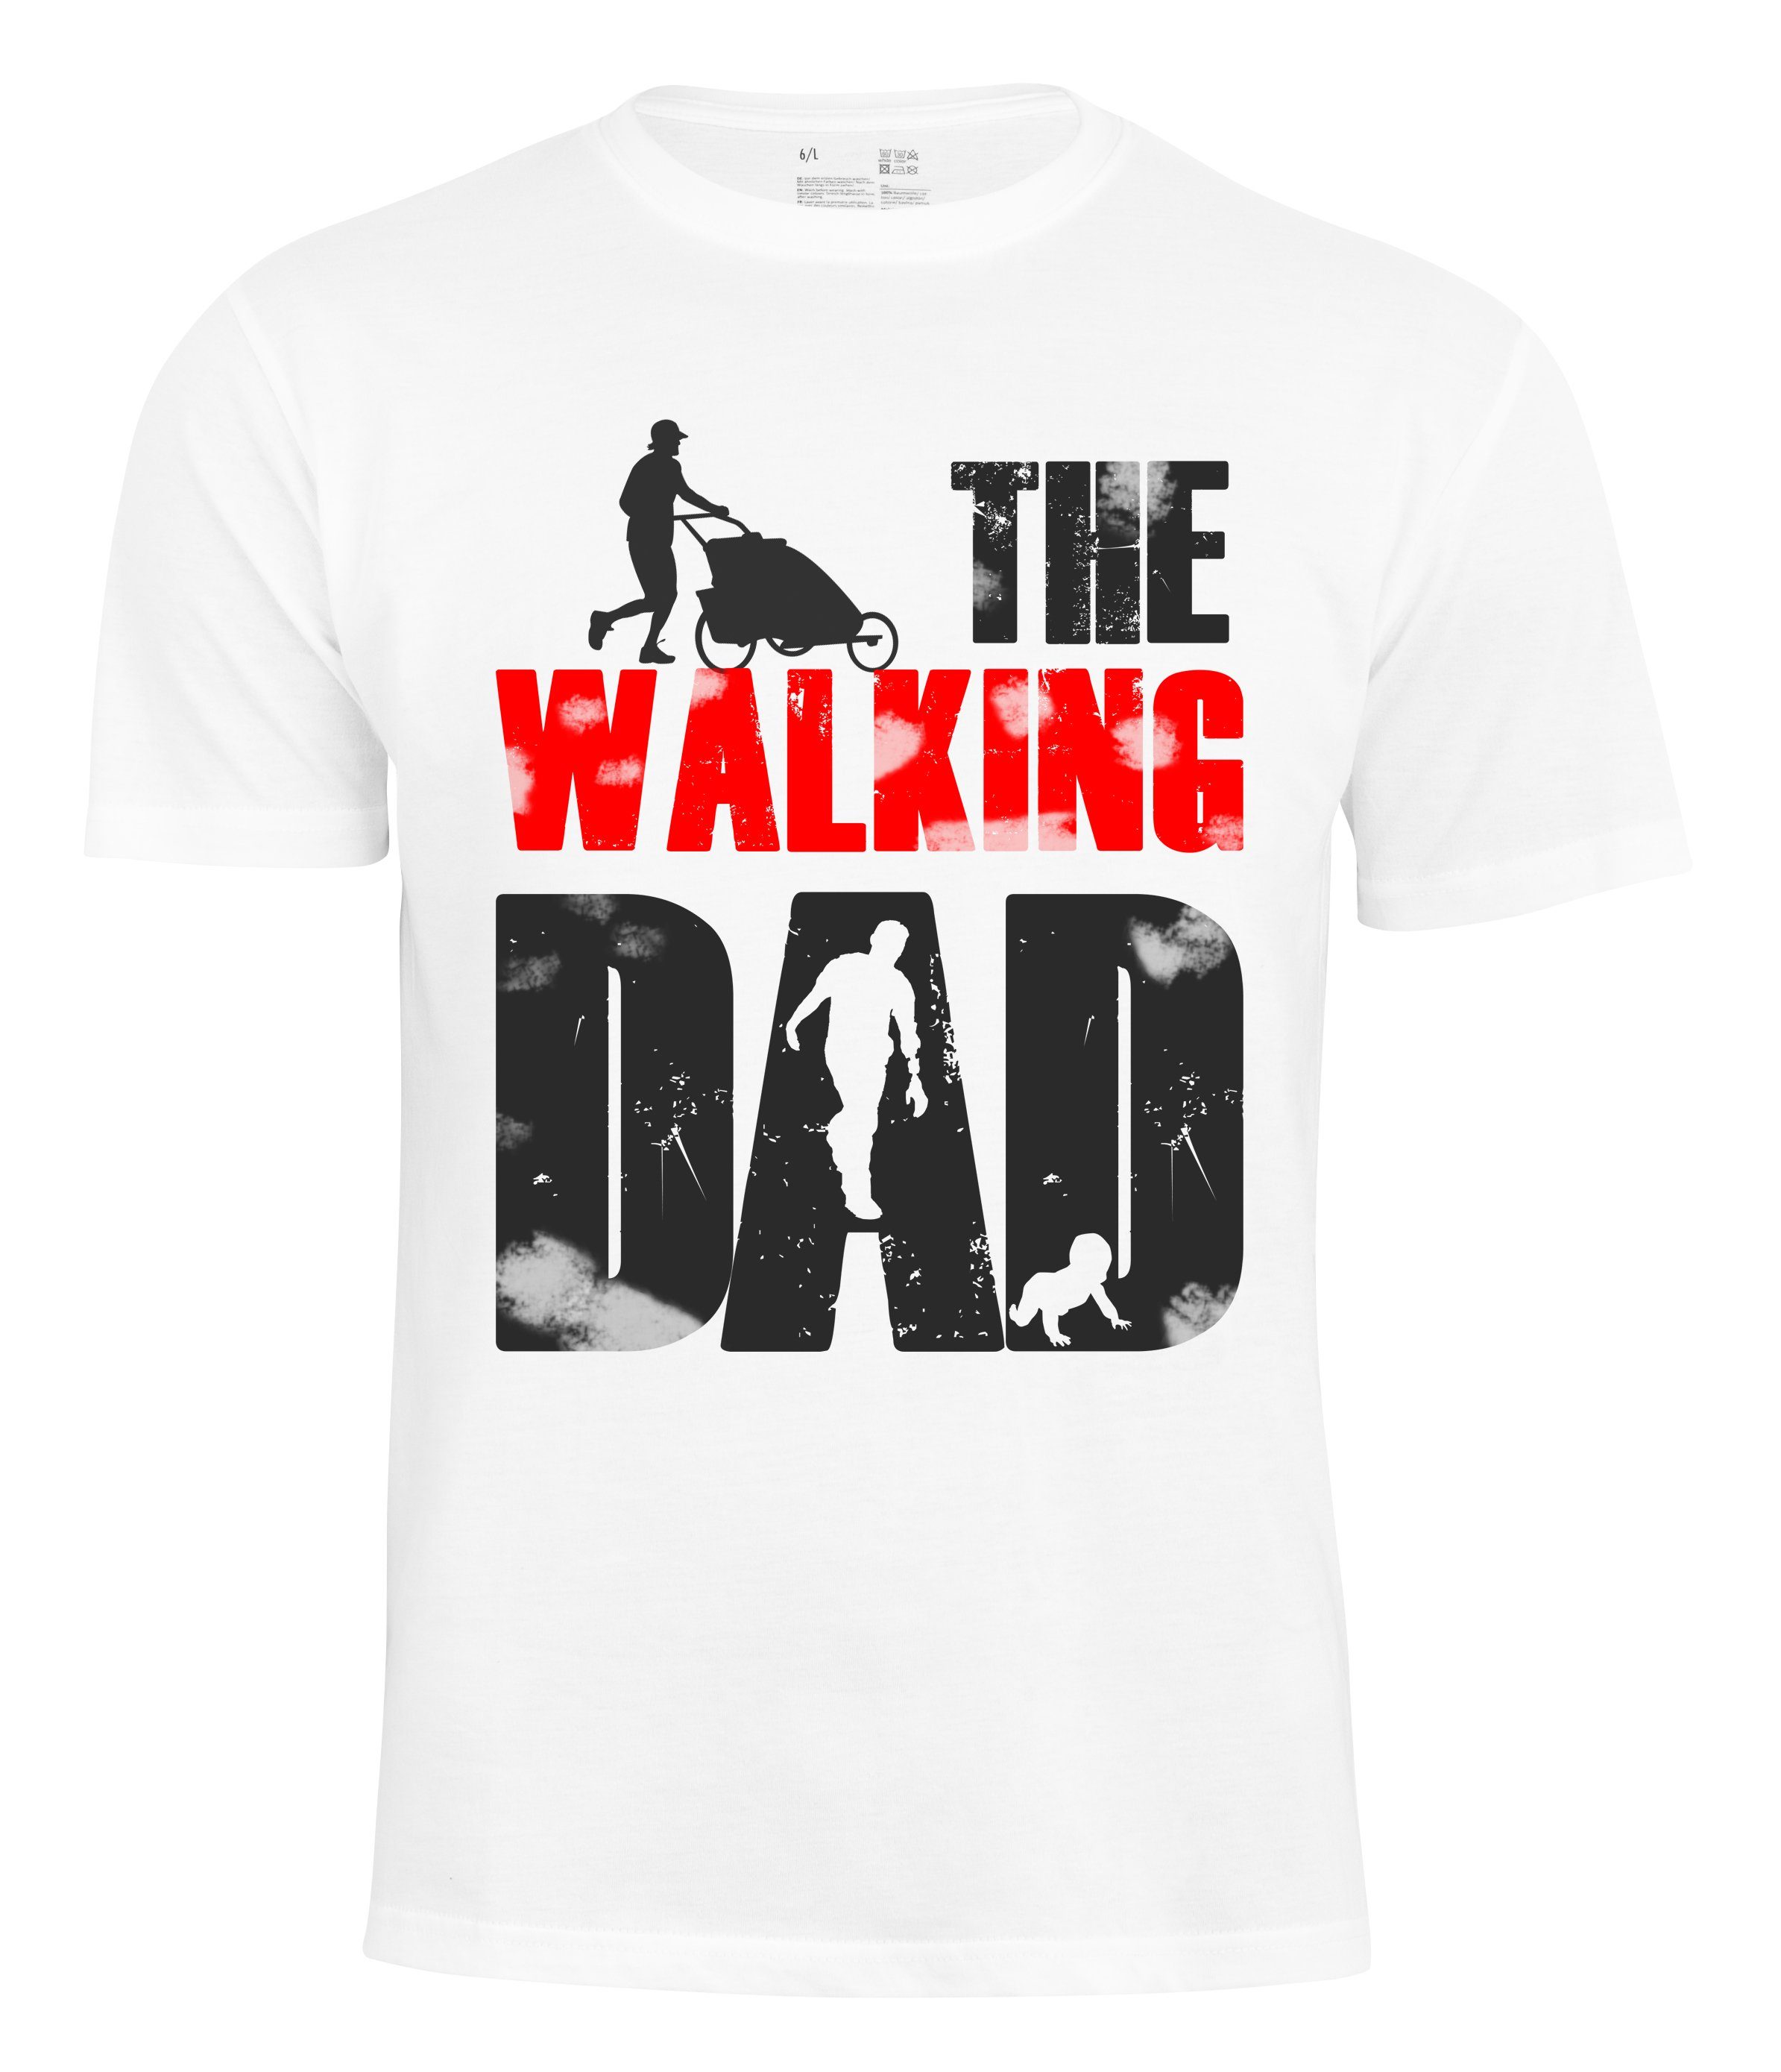 Cotton Prime® T-Shirt "THE weiss DAD" WALKING